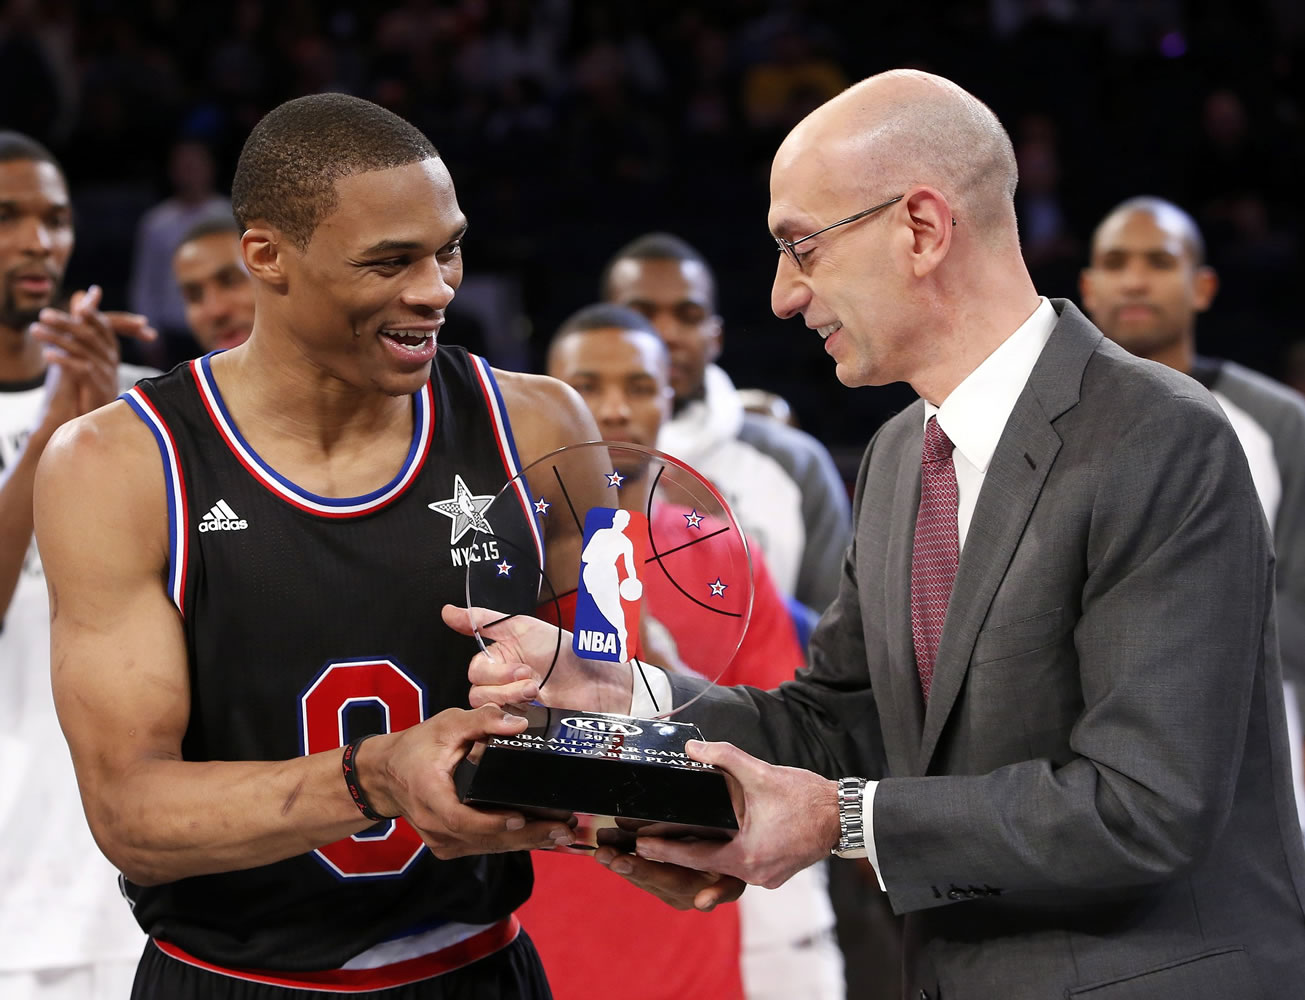 NBA Commissioner Adam Silver, right, hands West Team's Russell Westbrook the MVP trophy after the NBA All-Star Game, Sunday, Feb. 15, 2015, in New York.